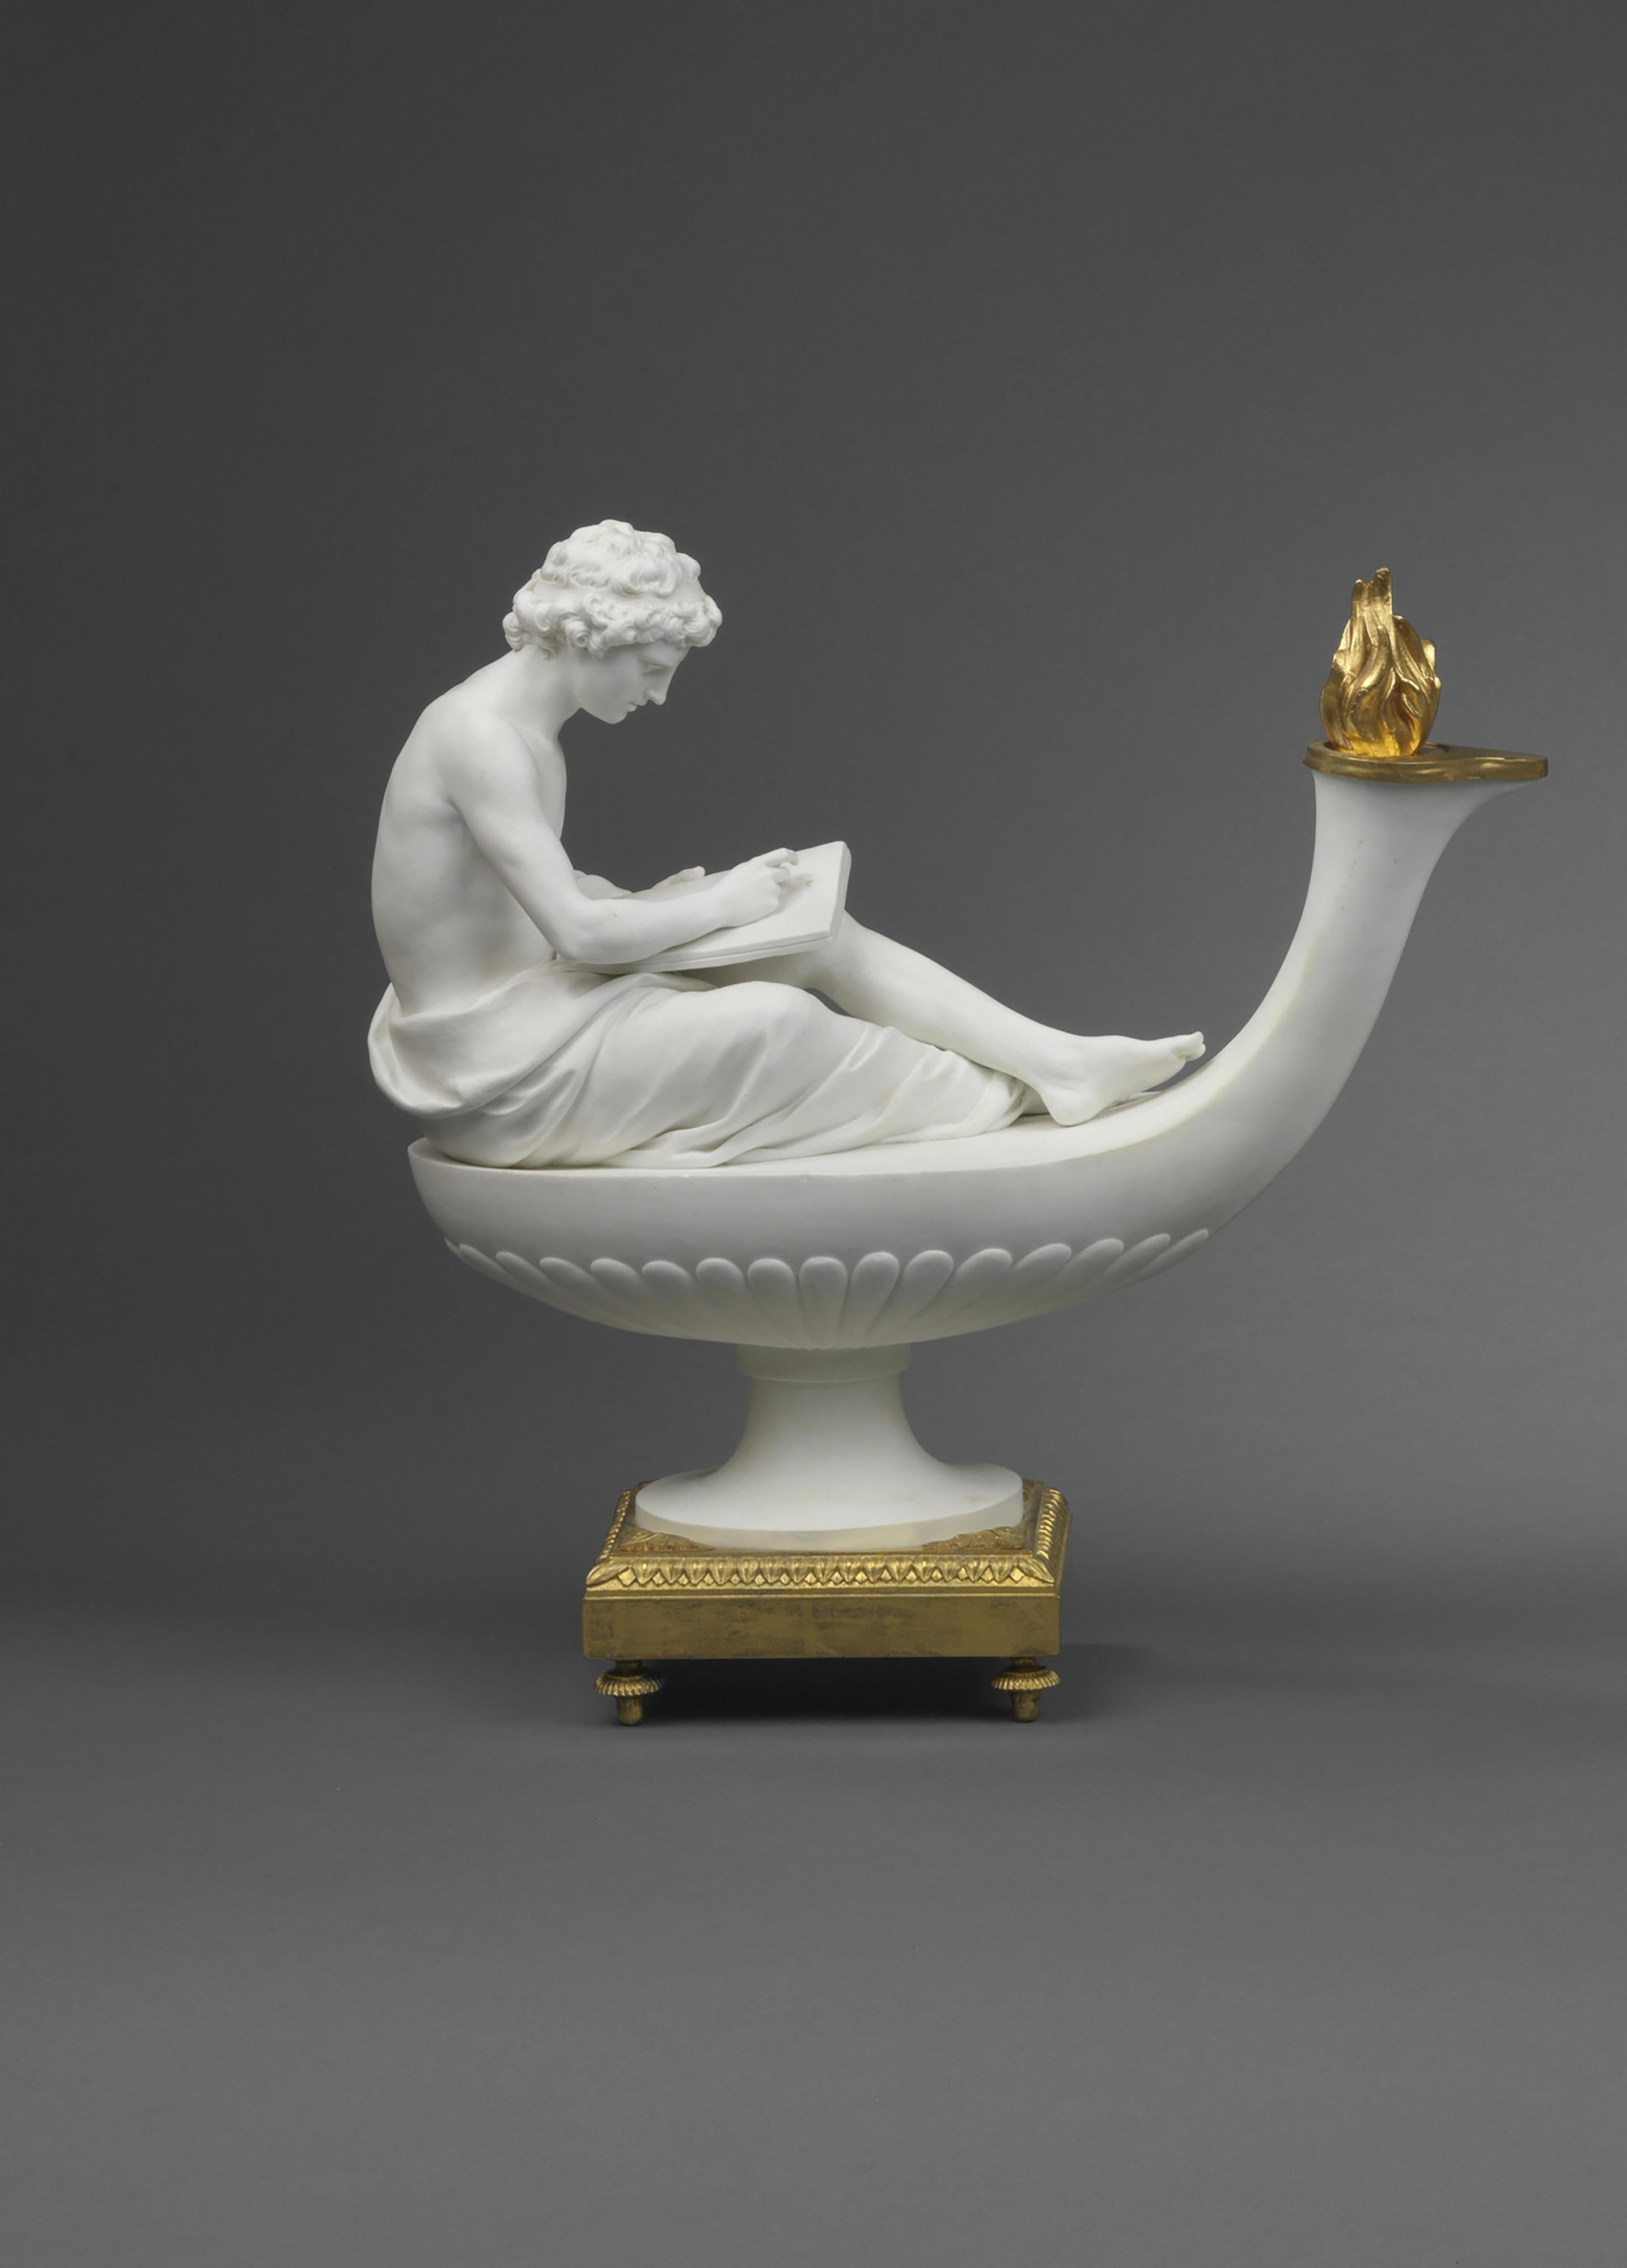 A pair of seated, allegorical, Sèvres biscuit figures, each one forming the top of an oil lamp, the spout being edged with an ormolu moulded ring: One being a figure of the woman, her hair elaborately plaited with a crescent to the front, her